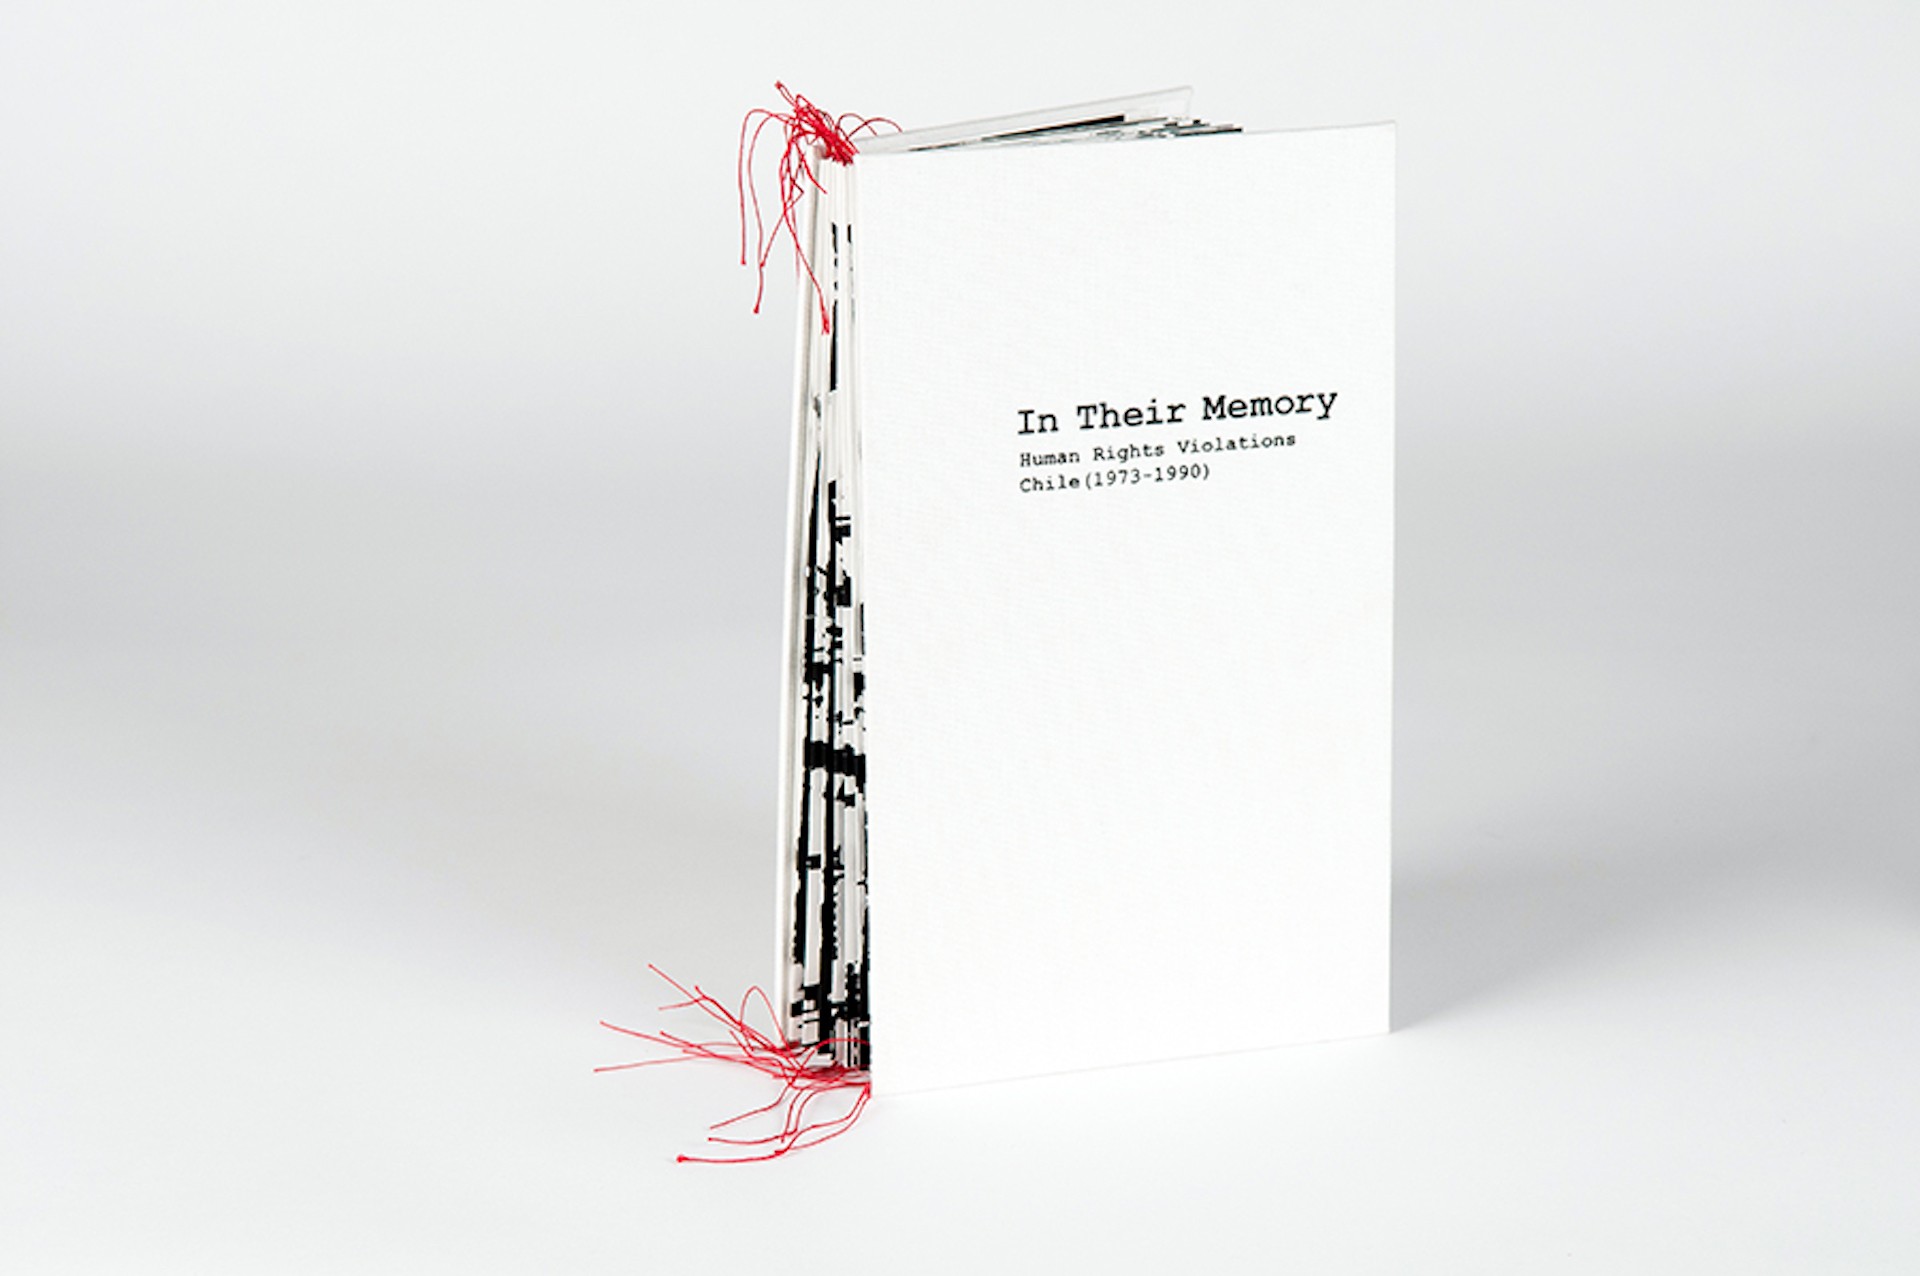 A printed book standing upright with bright red thread emerging from the top and bottom of the book spine. The book is titled "In Their Memory: Human Rights Violations Chile (1973-1990)"